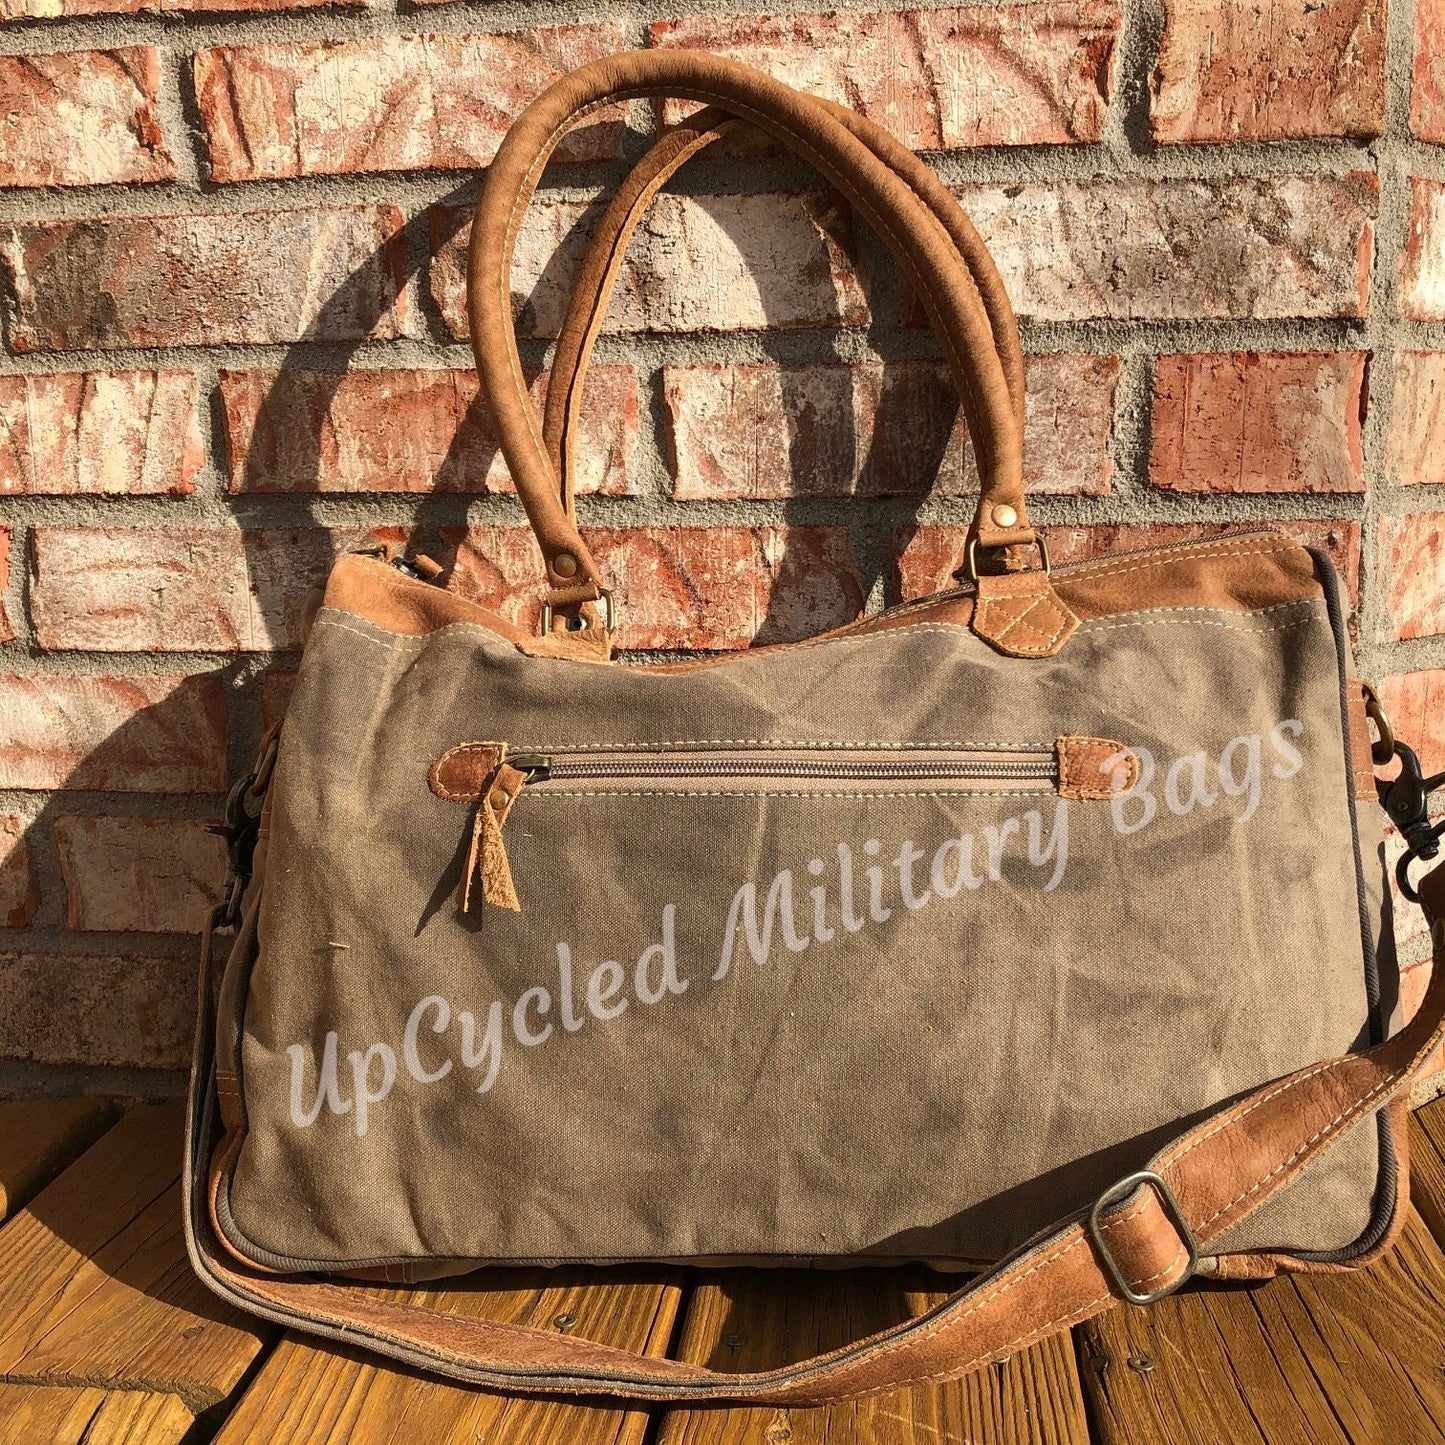 Grand Bazar Canvas Tote or Small Weekender with Detachable Crossbody Strap    Paris Inspired!